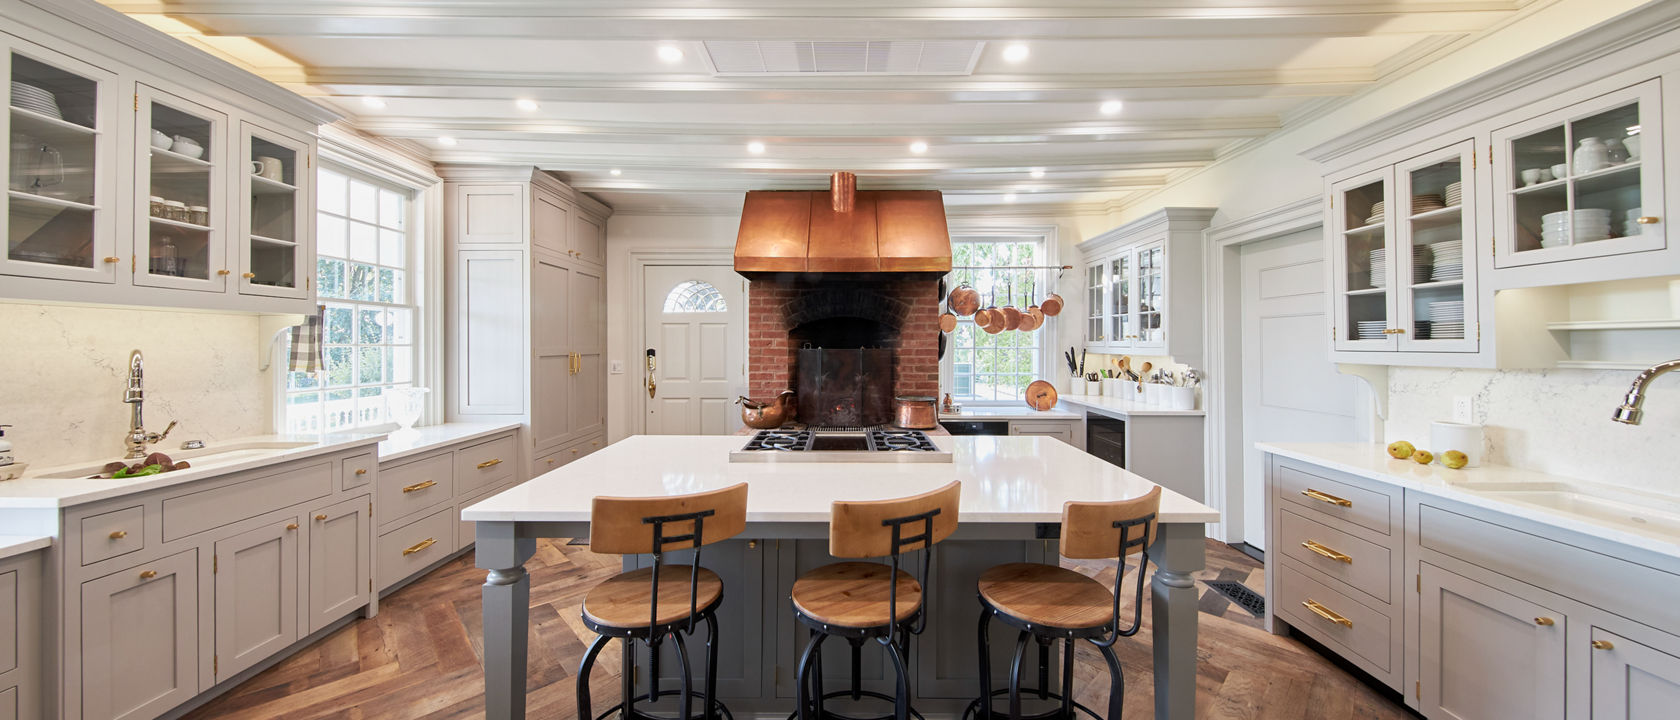 The Beekman 1802 home renovation with Whitby and Sutherland quartz countertops